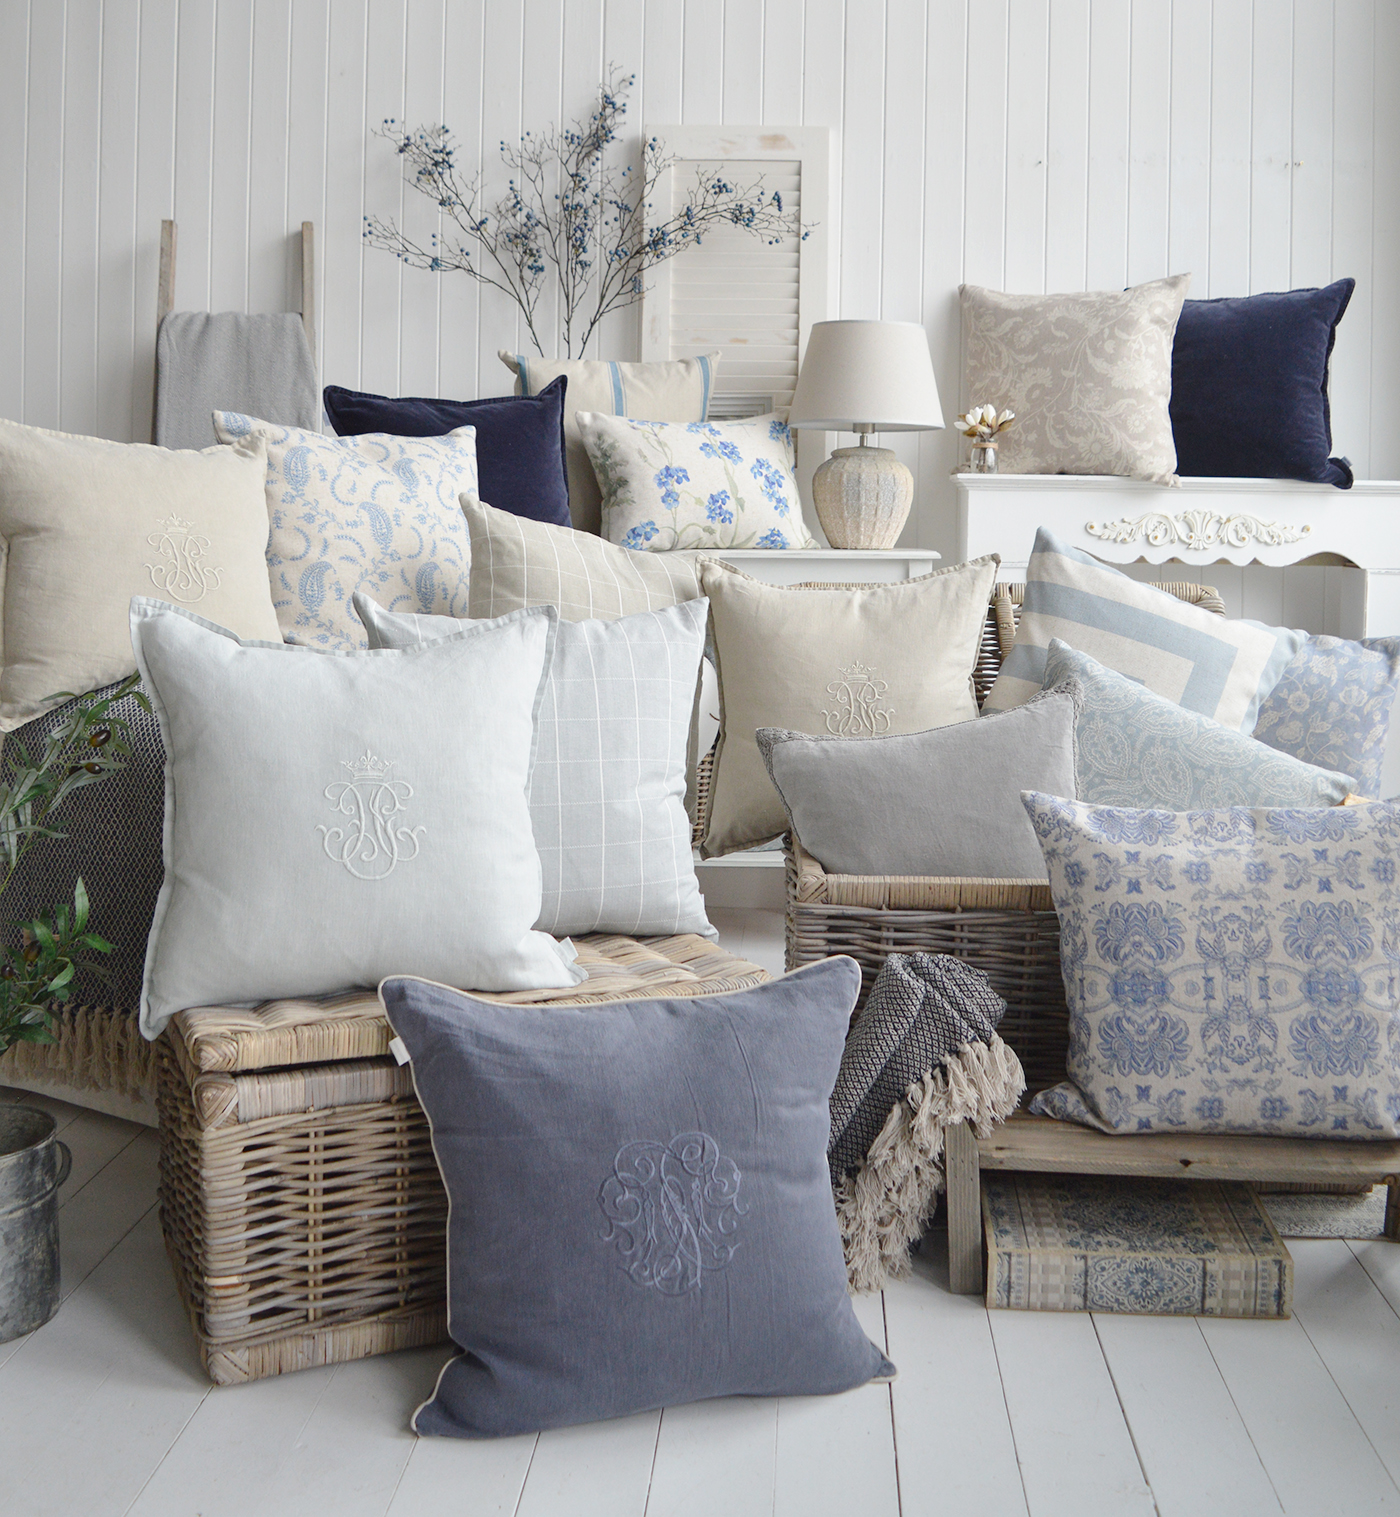 New England cushions for modern country, farmhouse and coastal homes and interiors